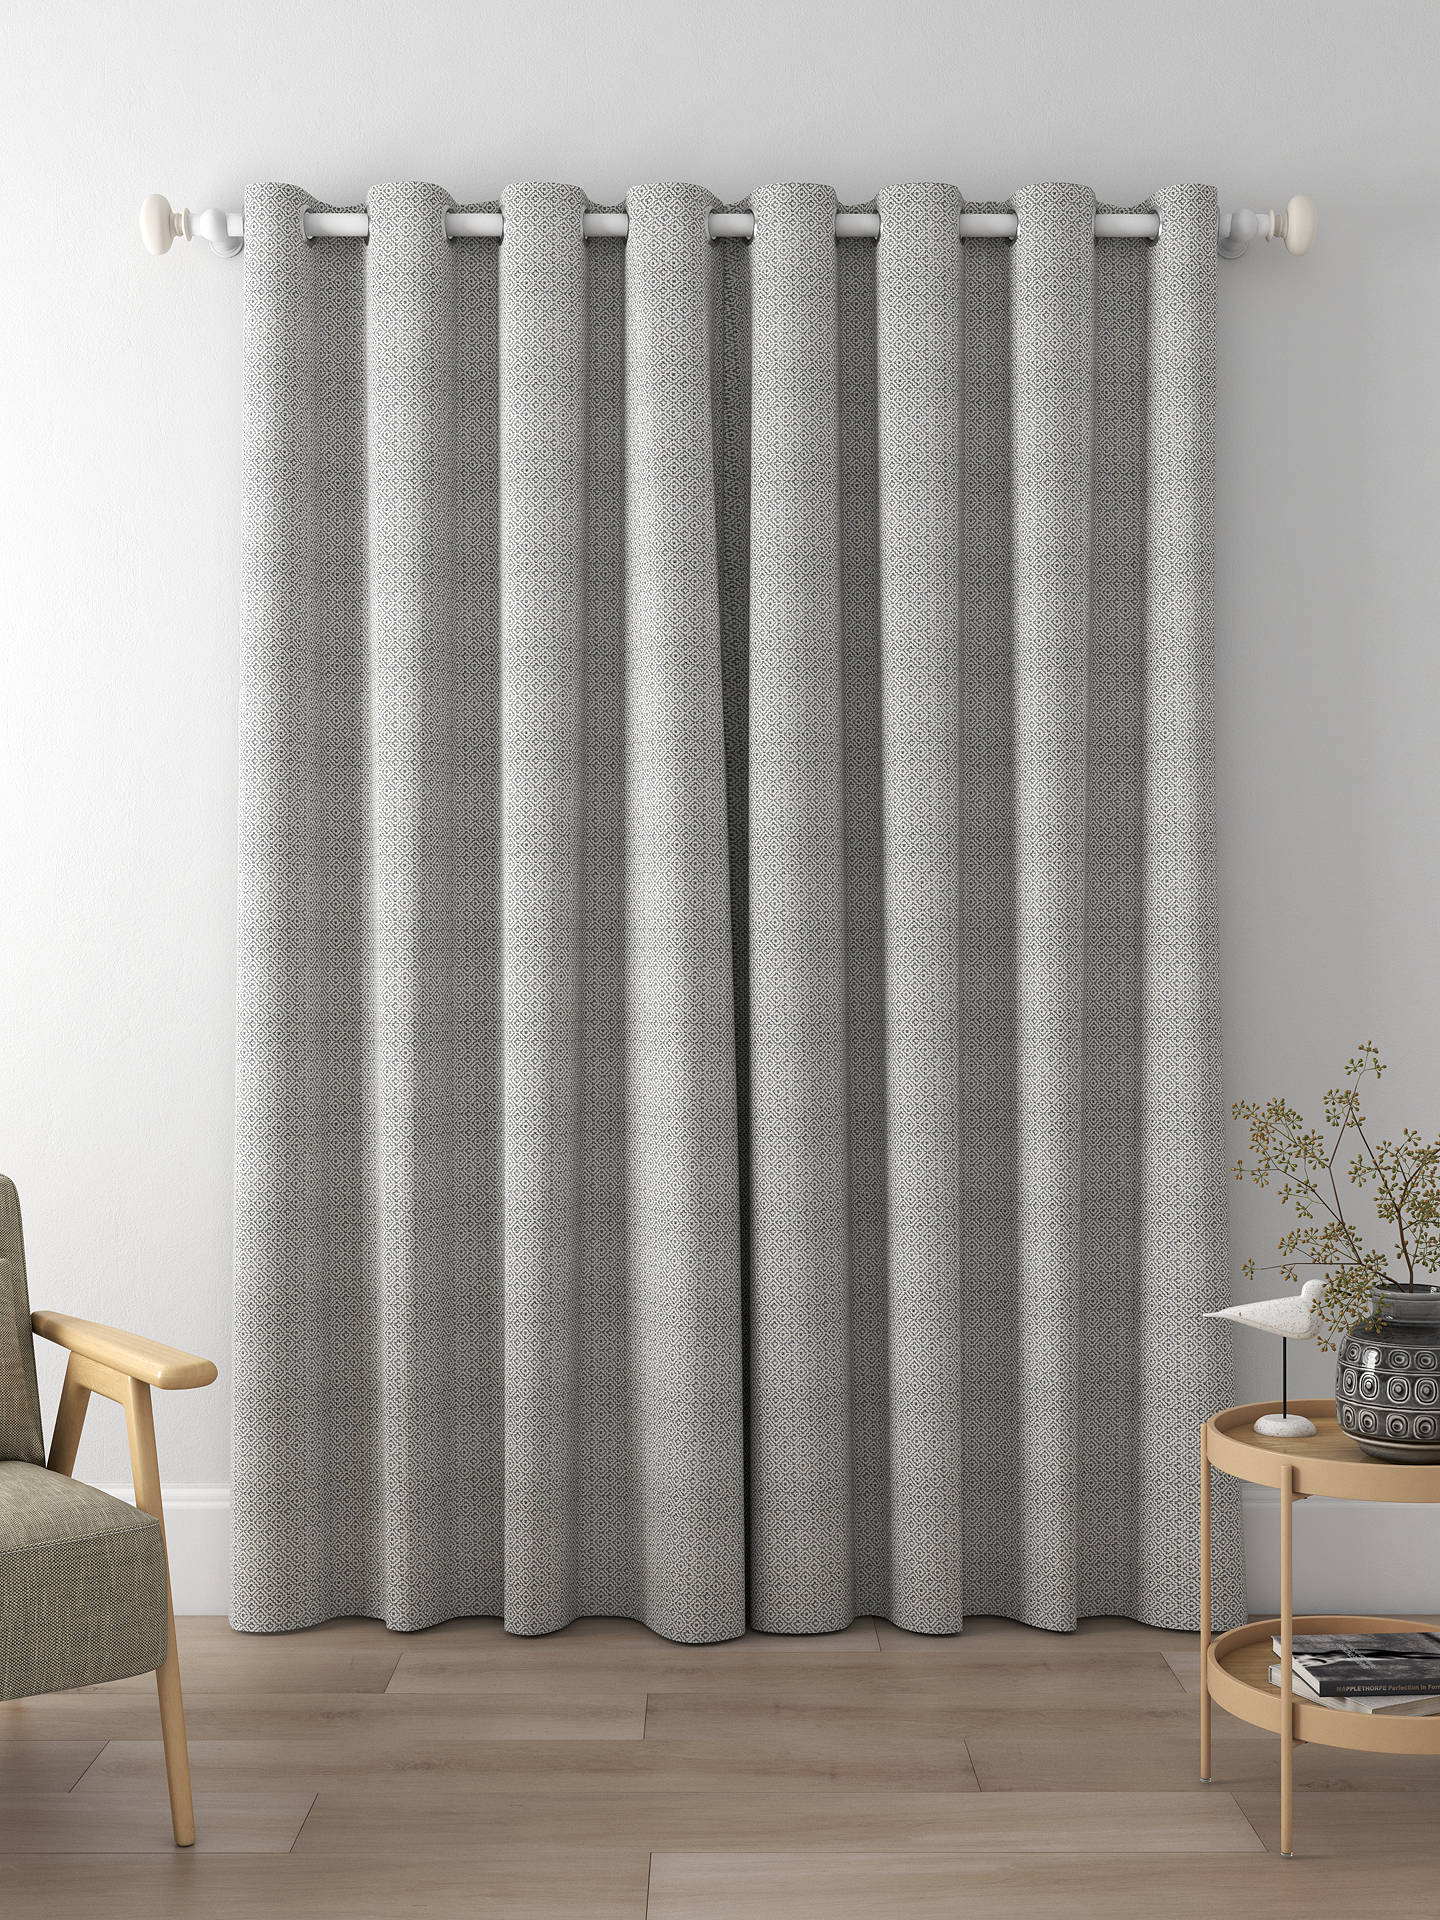 Sanderson Linden Made to Measure Curtains, China Blue